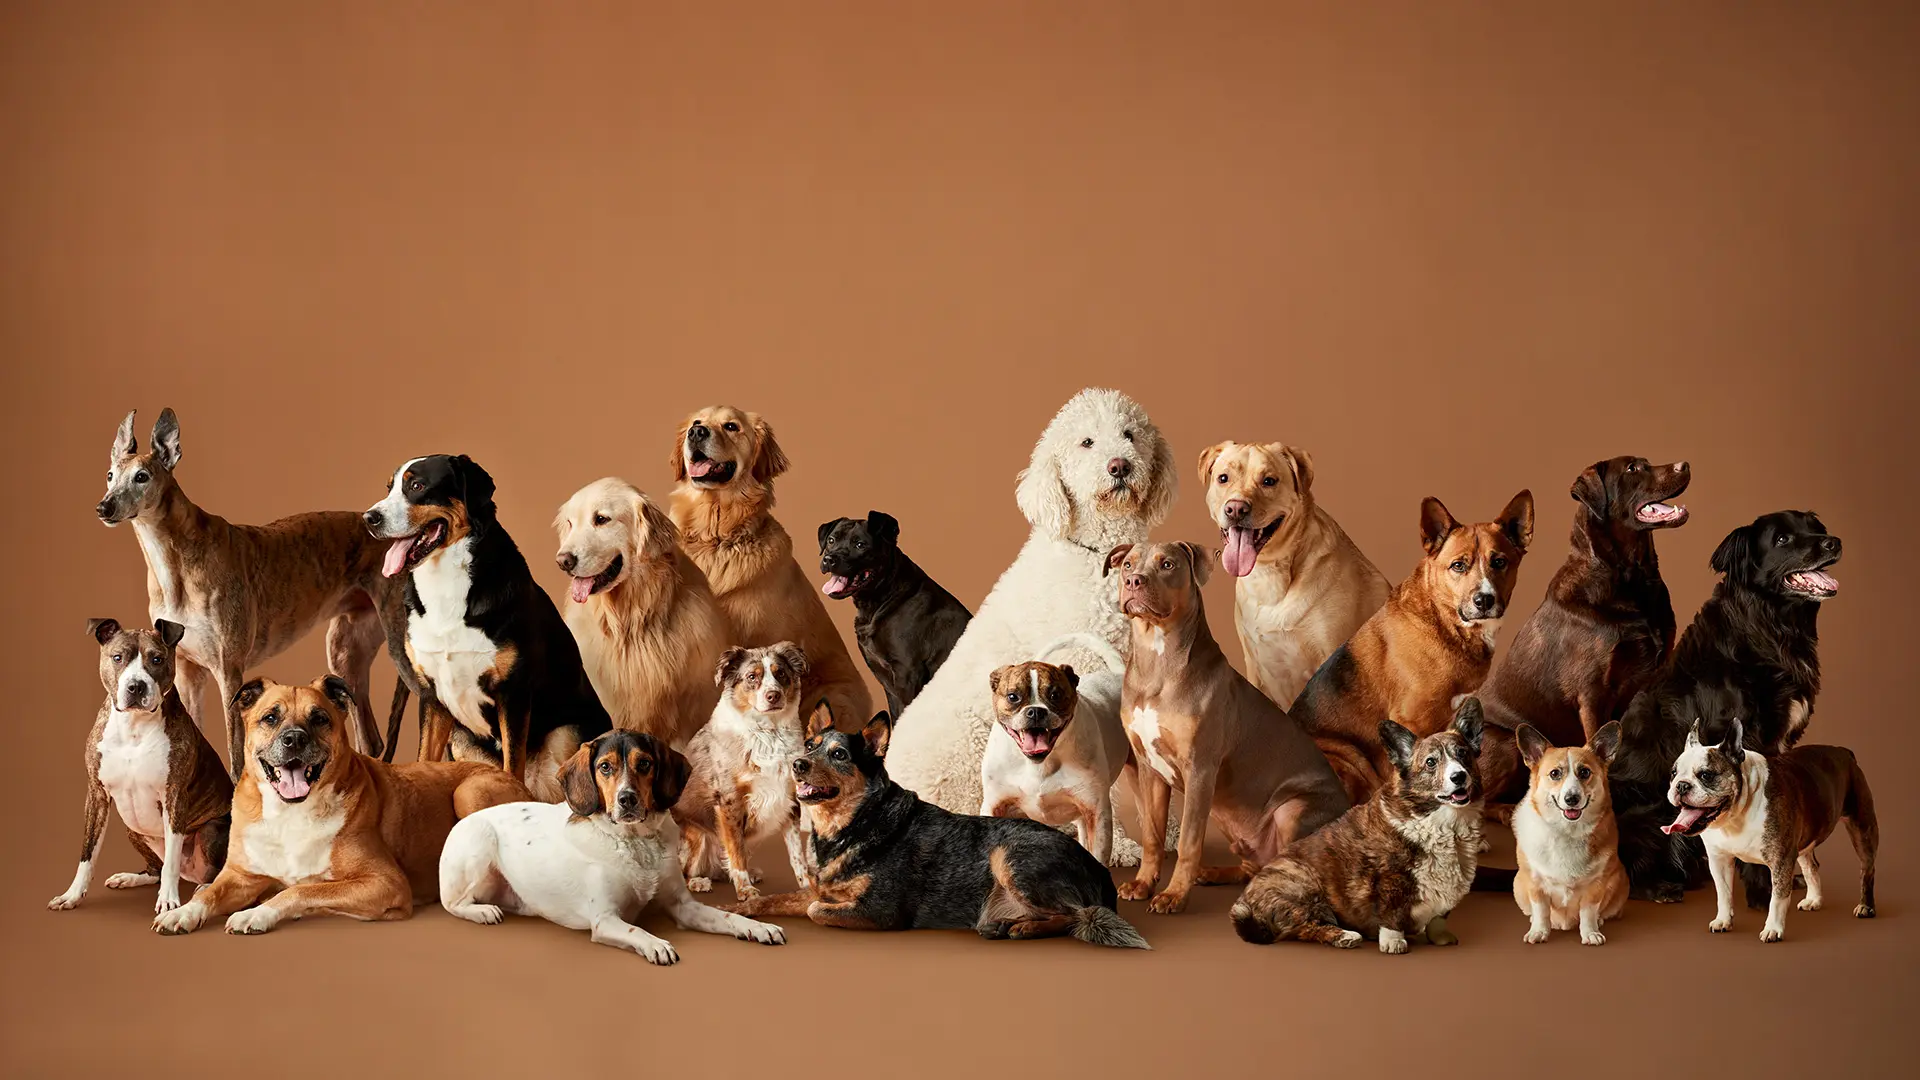 Image of multiple dogs